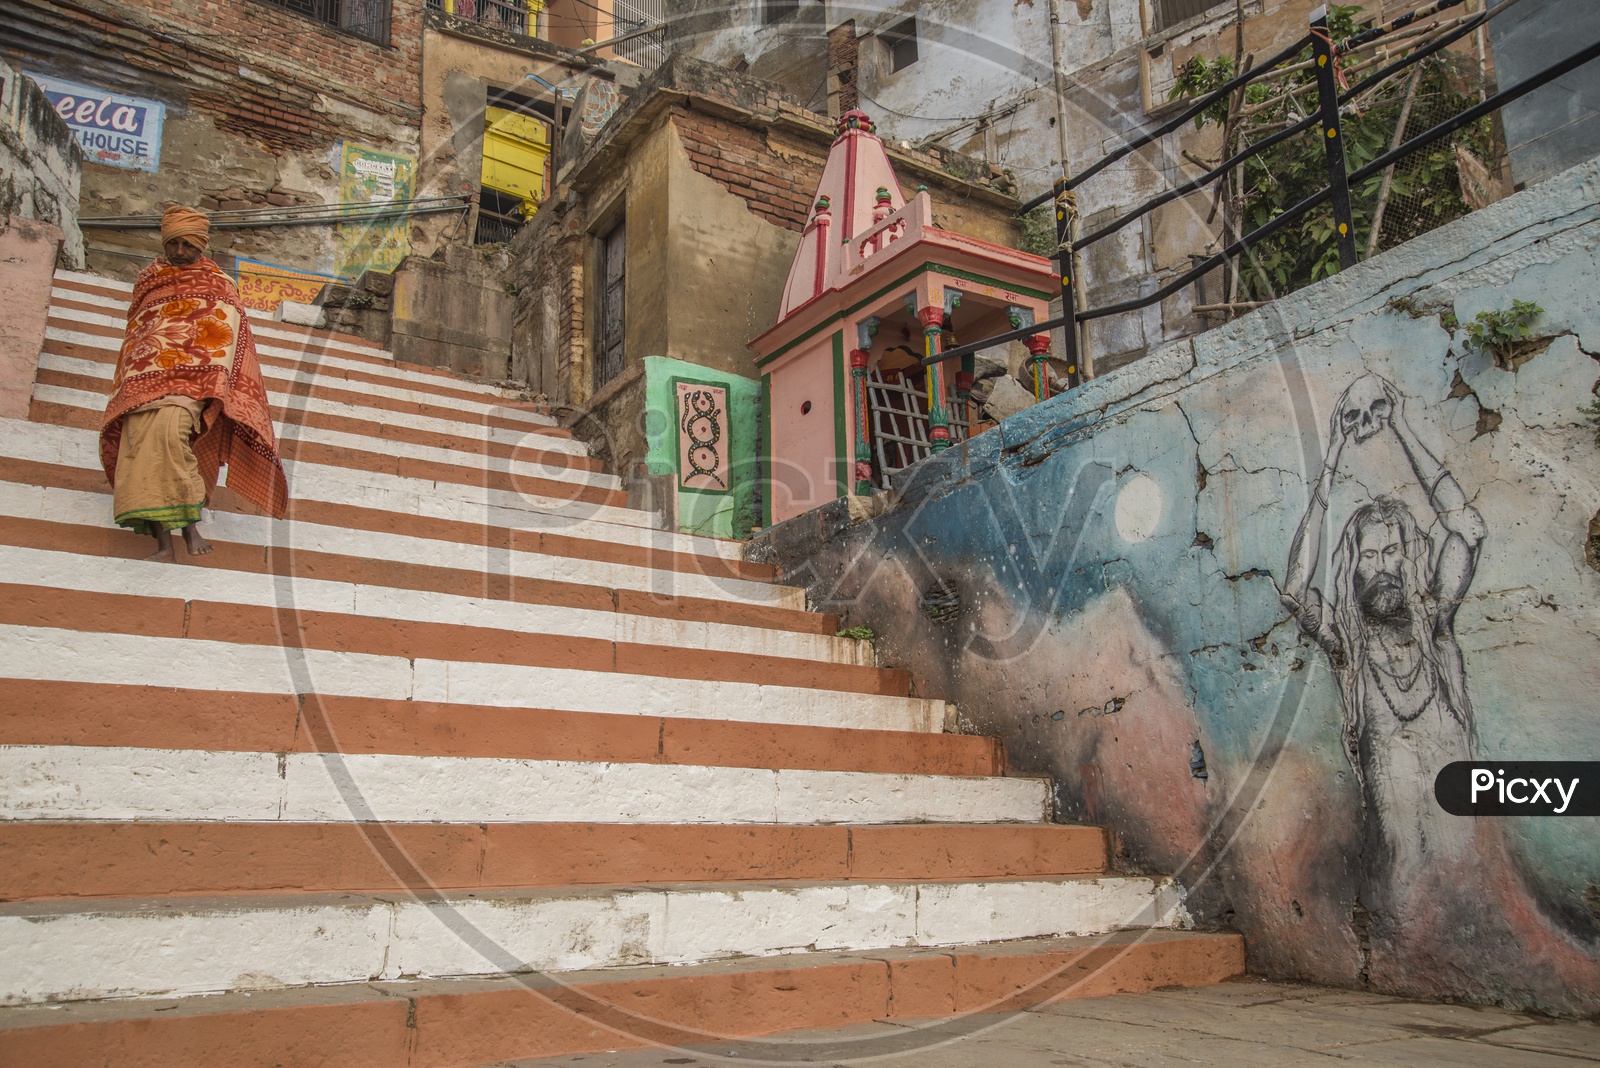 Paintings on the walls in the Ghats of Varanasi